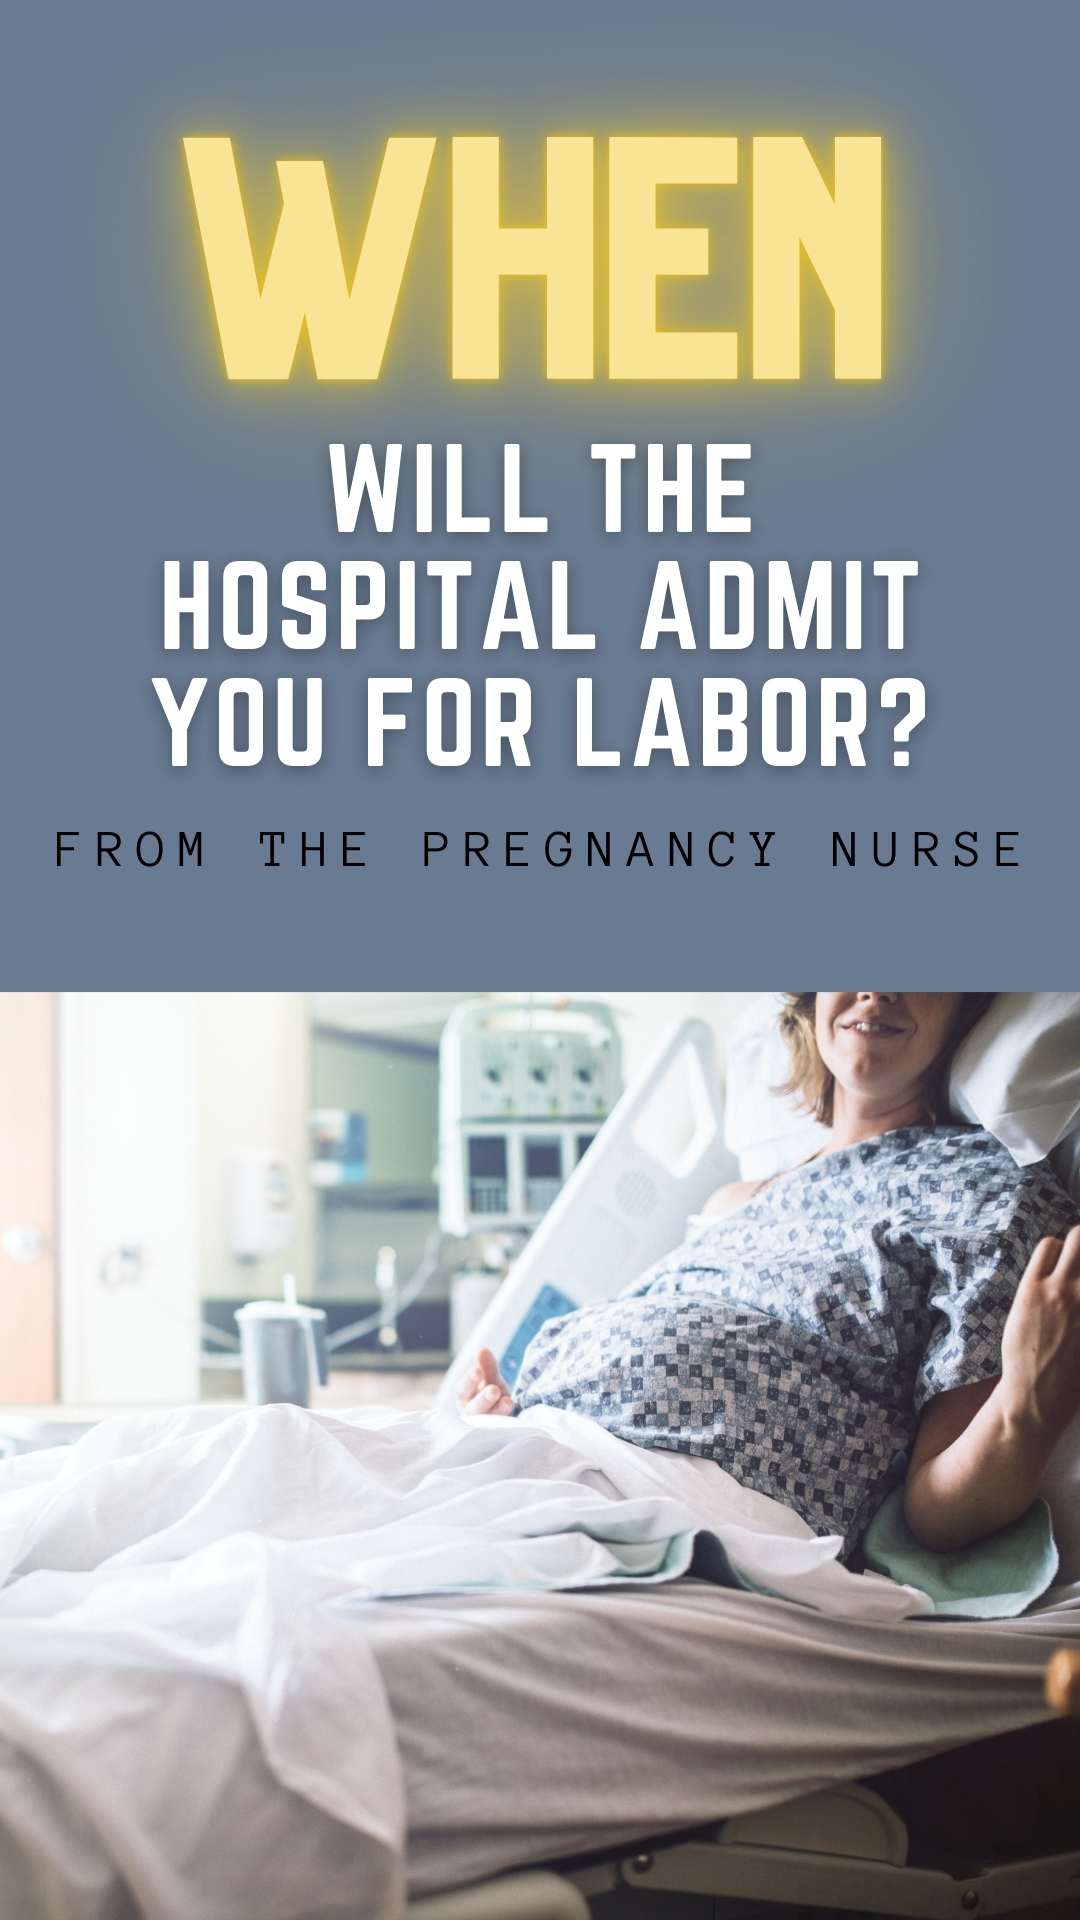 Most people want to avoid going to the hospital only to be sent home. Here are some tips on when you should go to the hospital for labor based on what most hospitals consider "active labor." Knowing these things ahead of time can help you feel more prepared and confident about your decision!